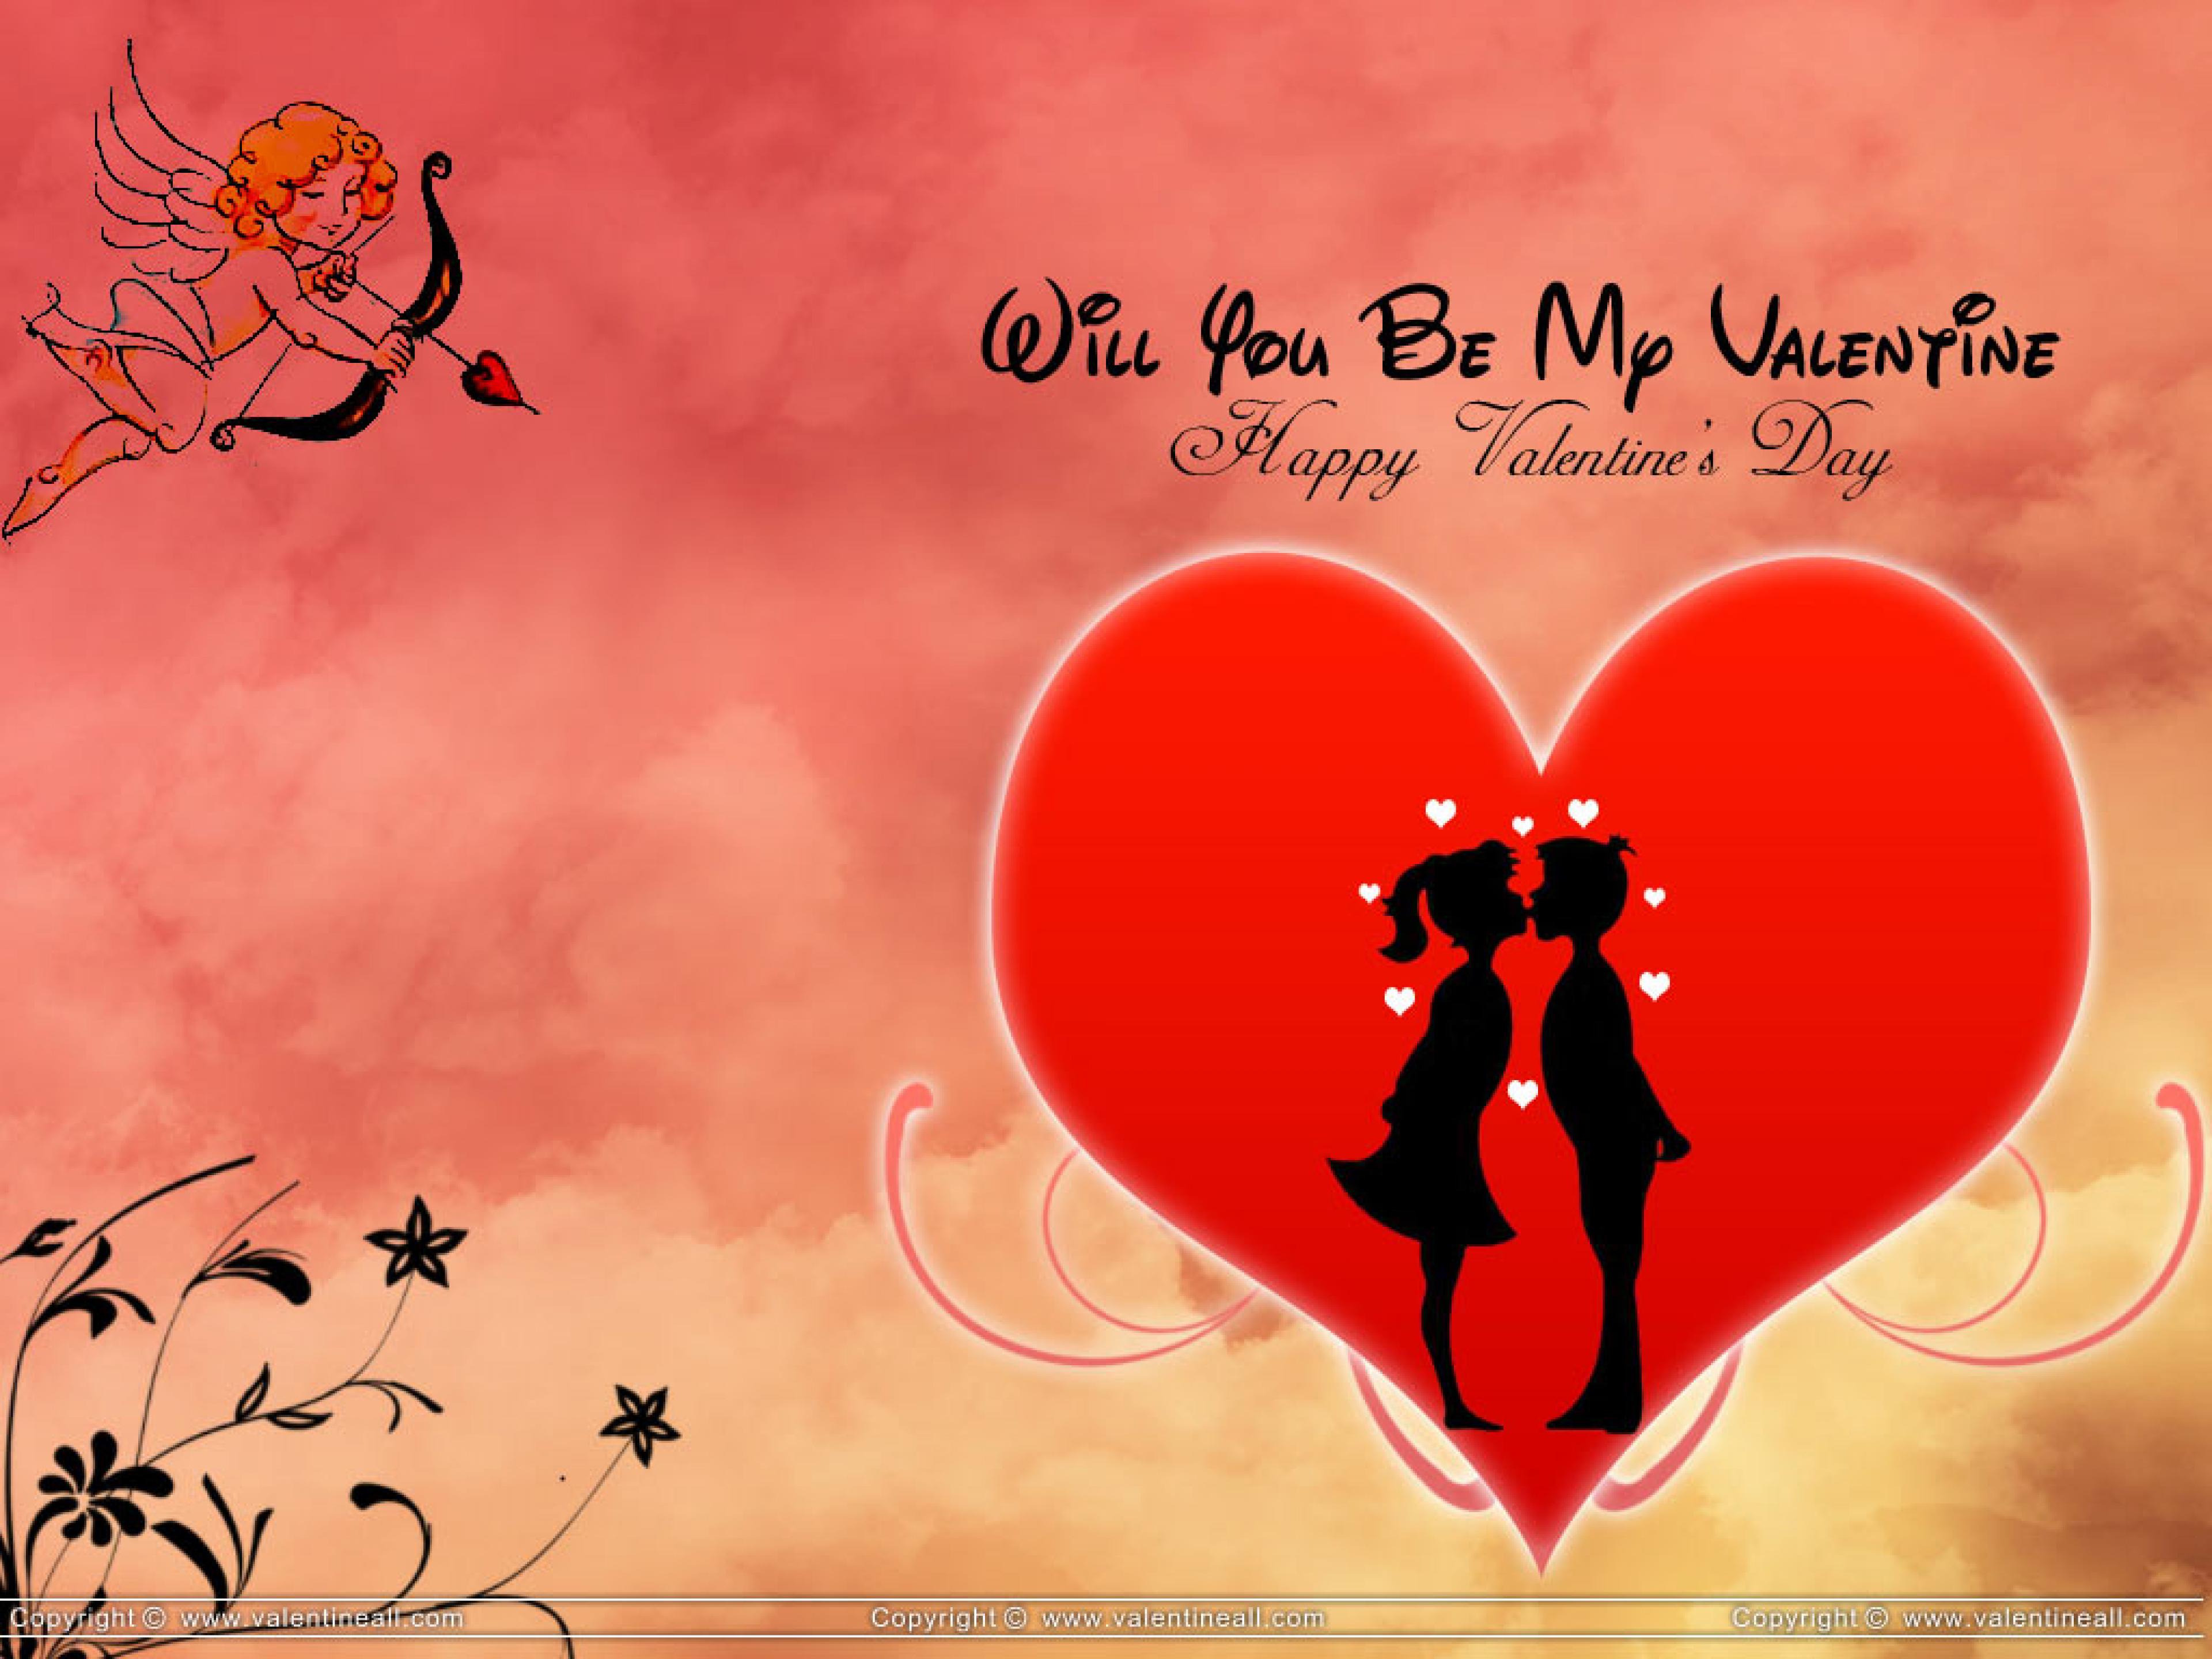 Heart Kiss Background Wallpaper   Will You Be My Valentine